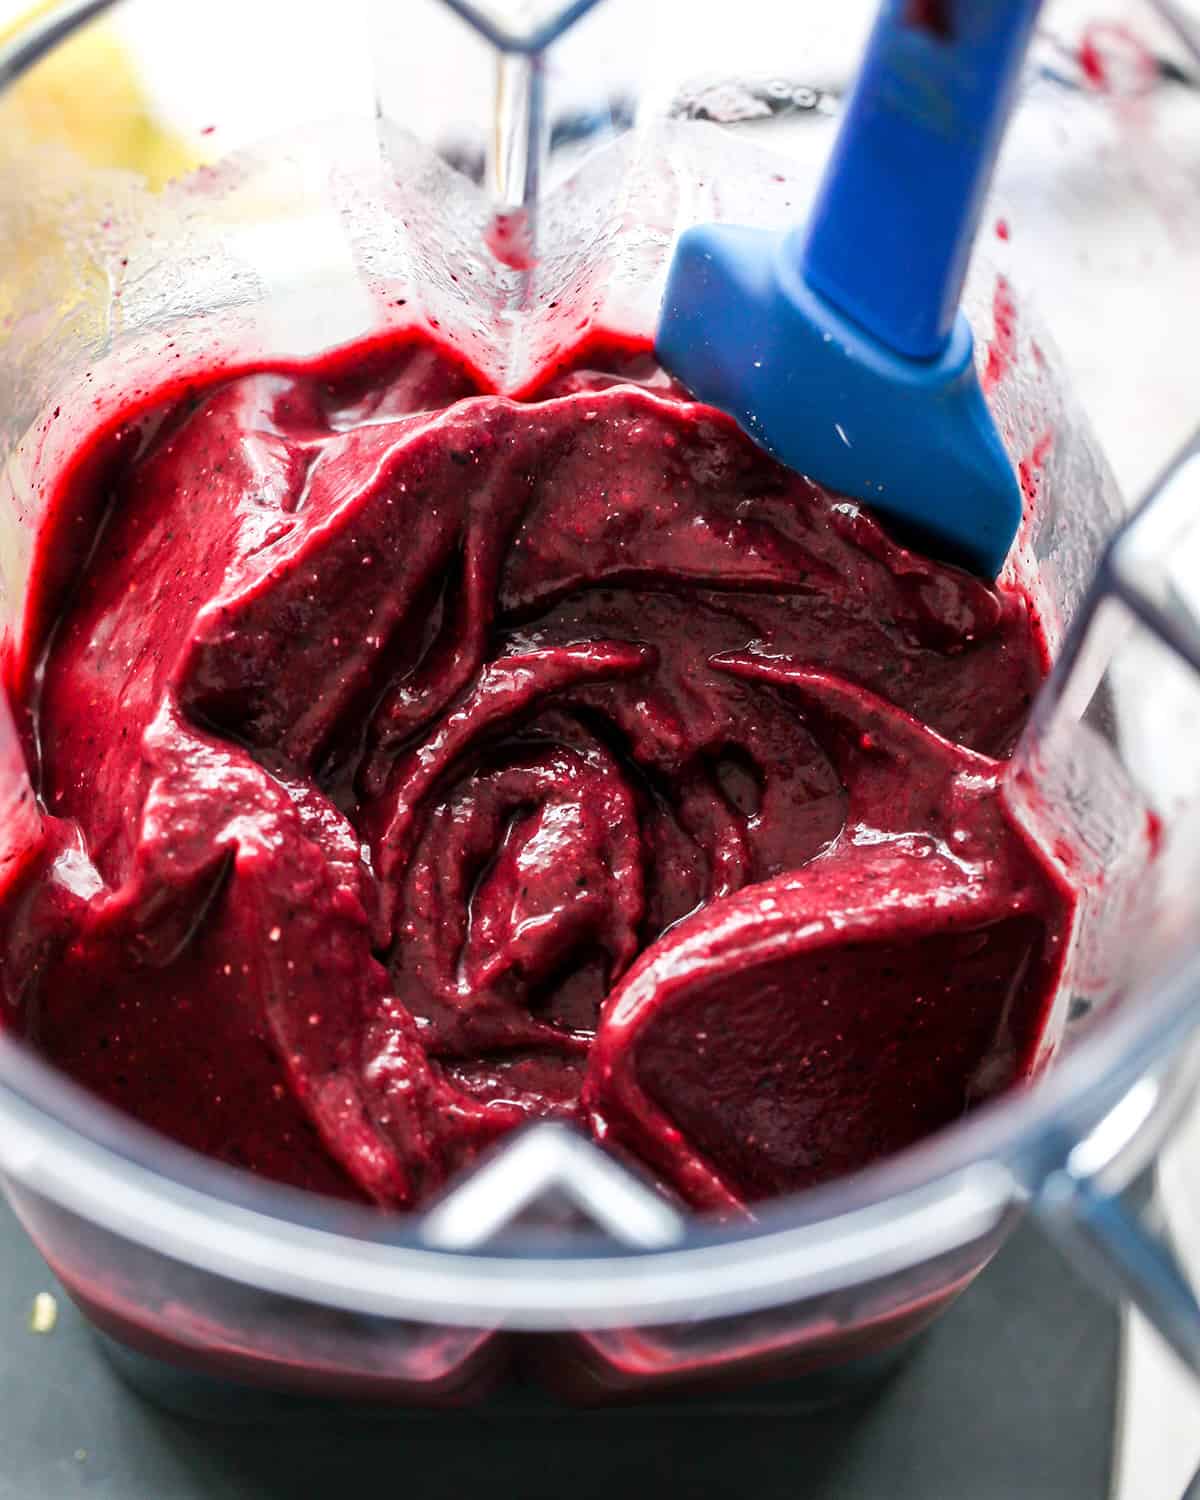 How to Make an Acai Bowl - scraping ingredients into the blades of a blender that is turned off.